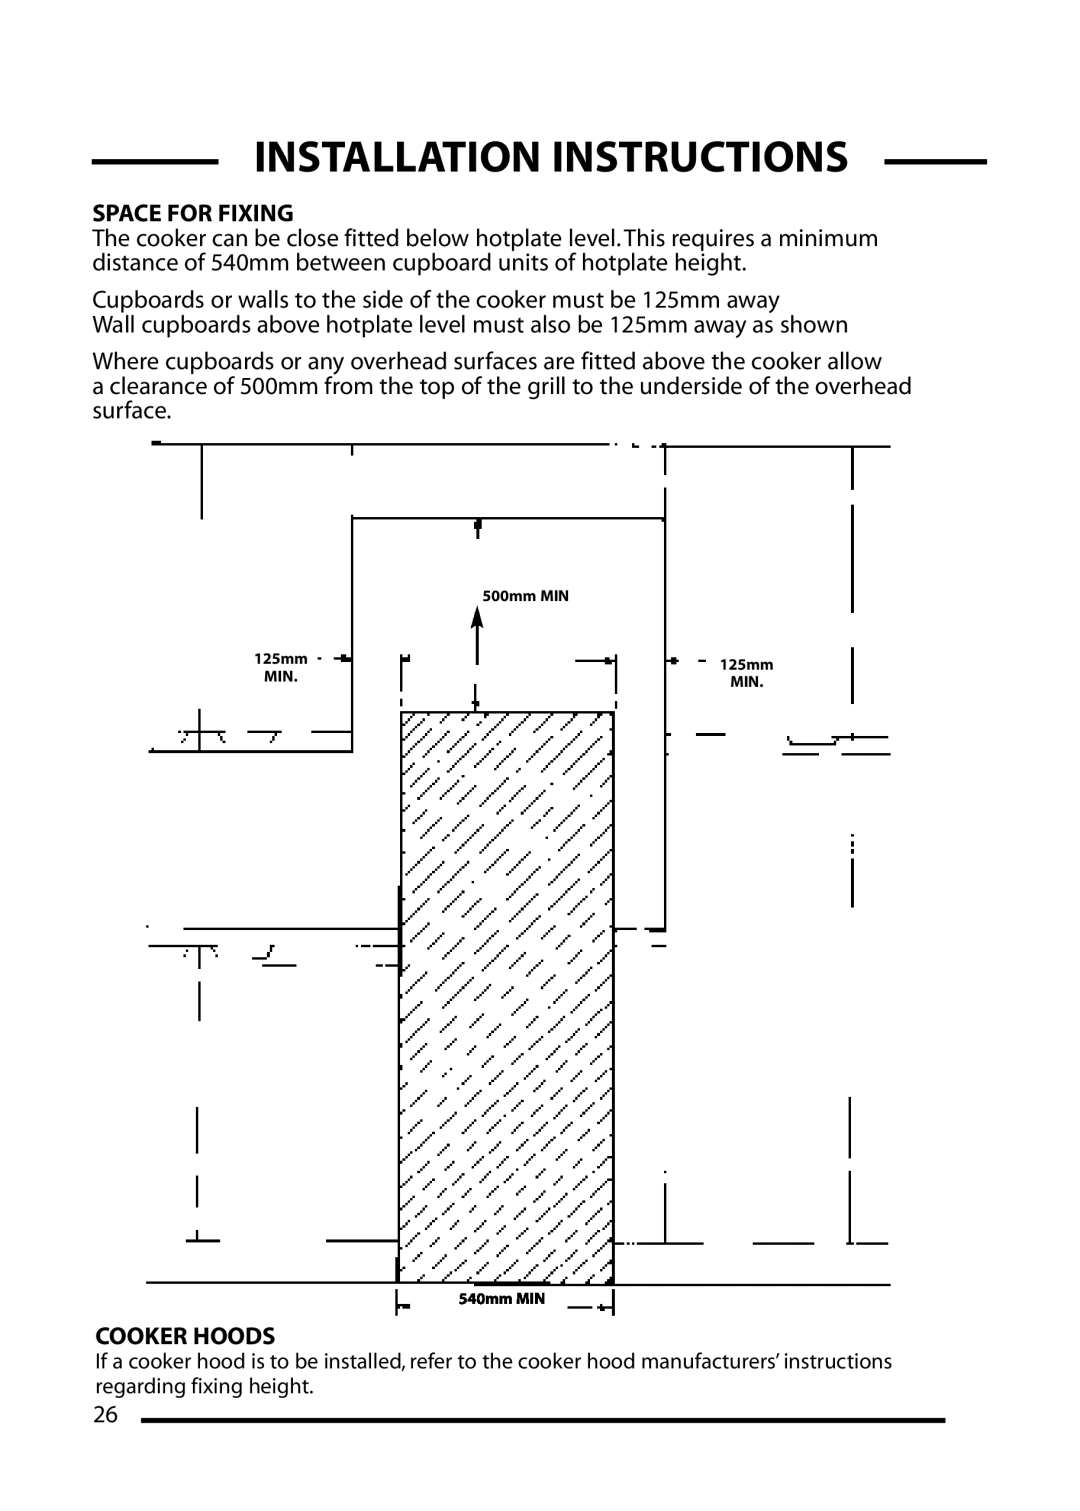 Cannon 4466200024-01 installation instructions Space For Fixing, Cooker Hoods, Installation Instructions 